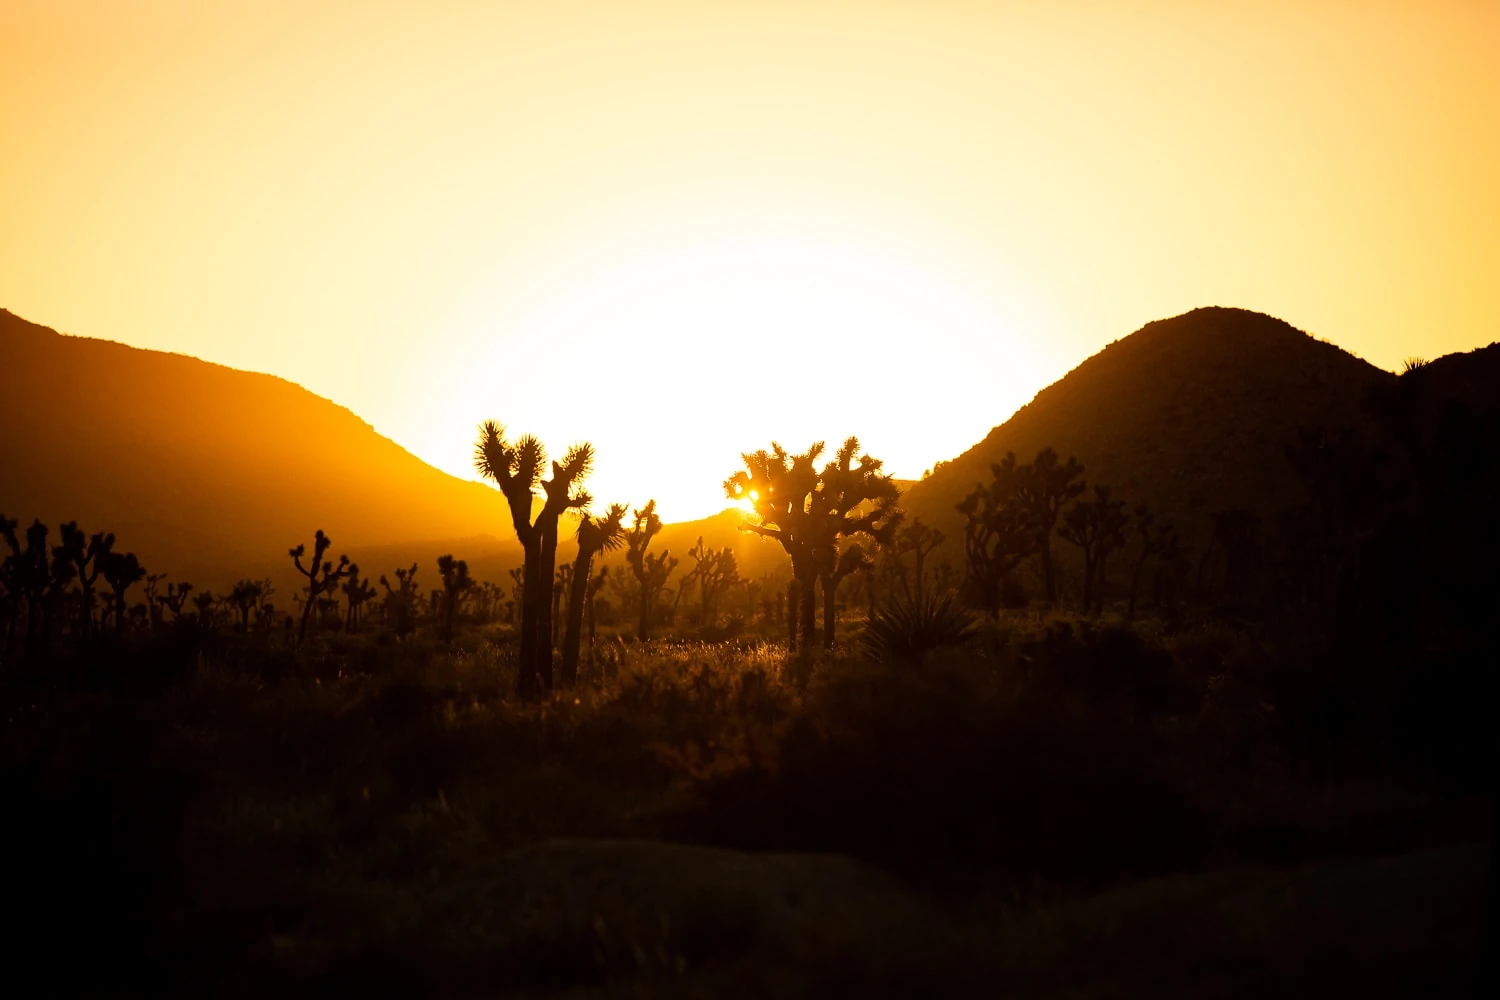 The sunset turns the sky orange and and glows over a valley of Joshua Trees.